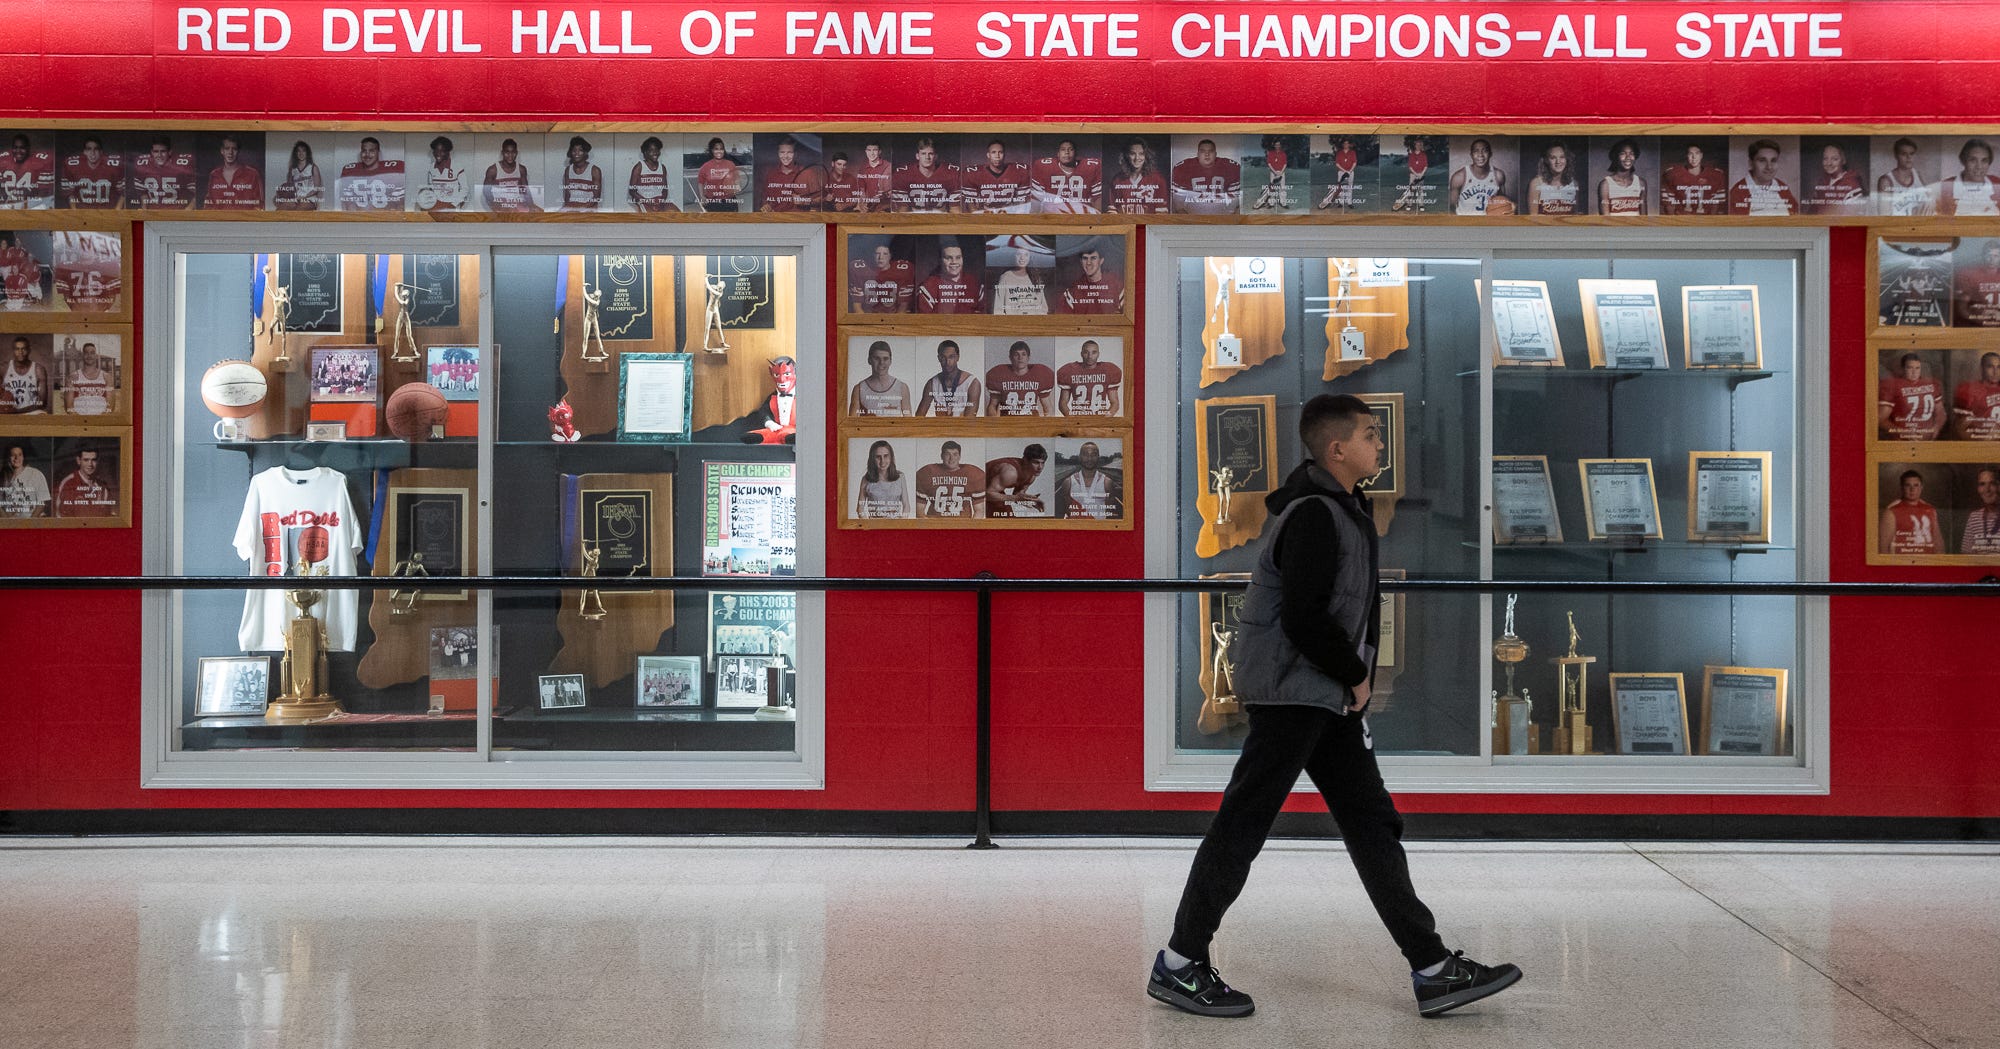 Big Indiana Gyms: Tiernan Center helped create state championship team